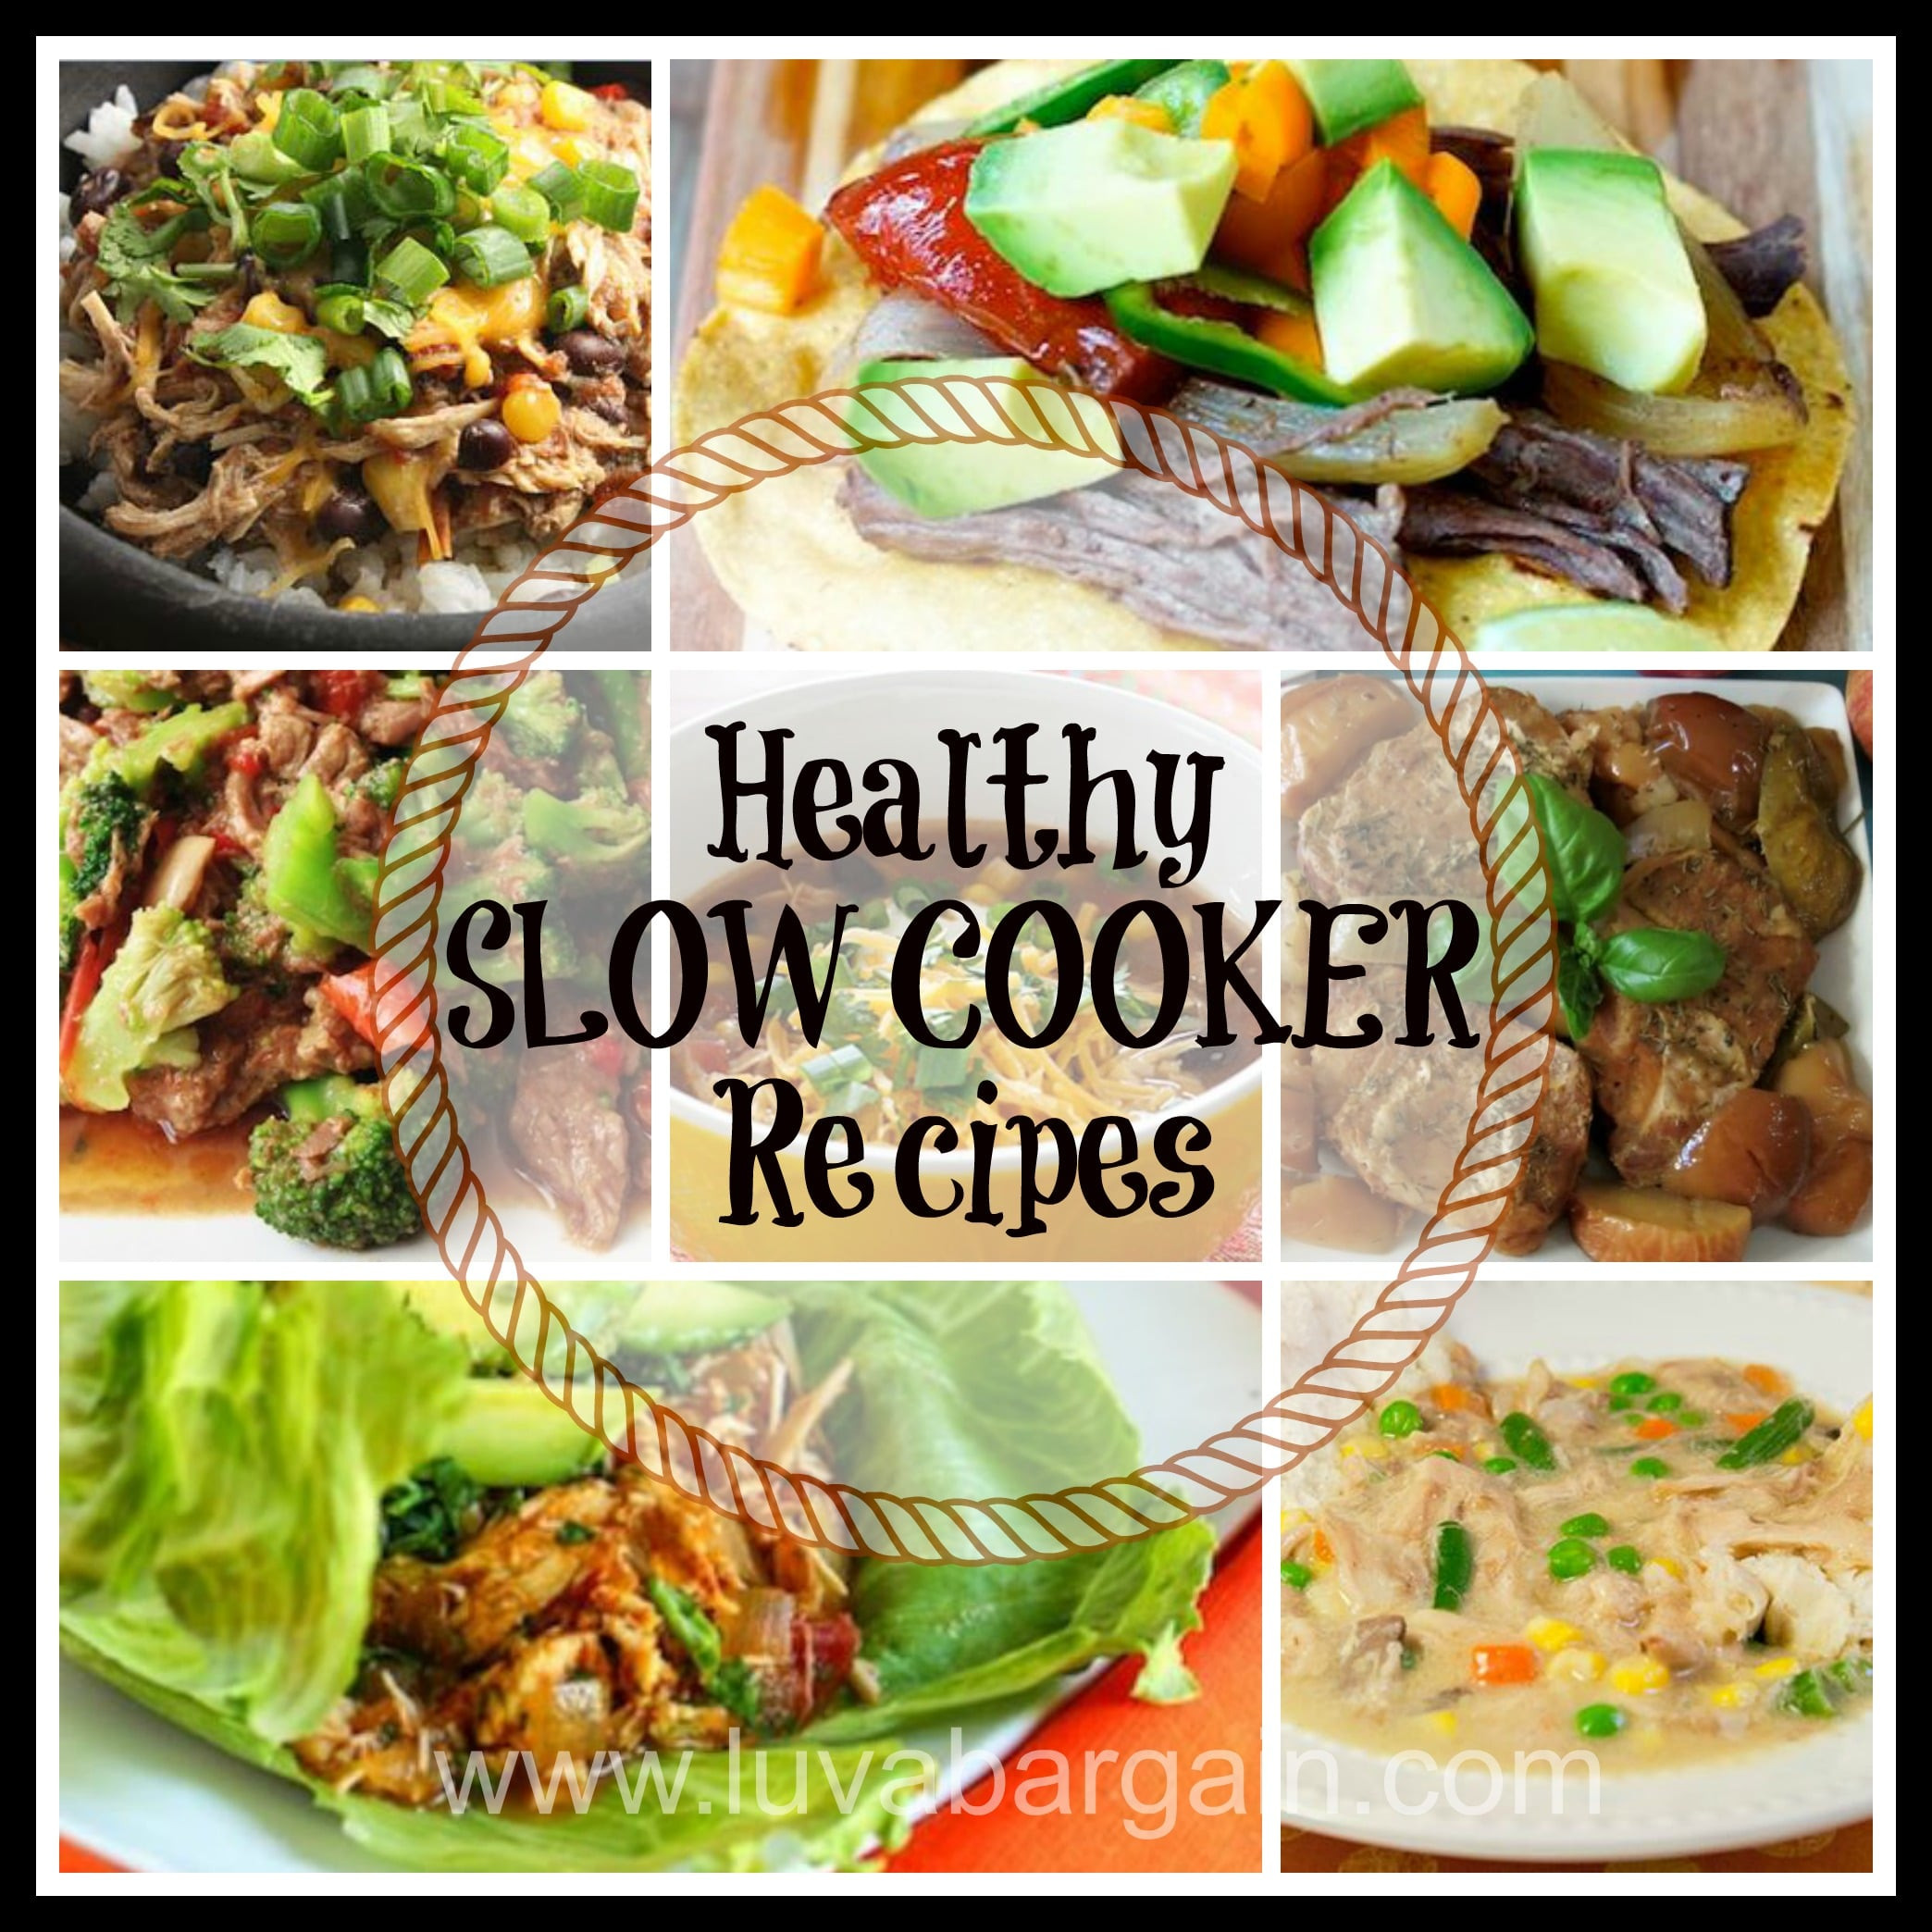 Slow Cooker Healthy Recipes the Best Ideas for Healthy Slow Cooker Recipes